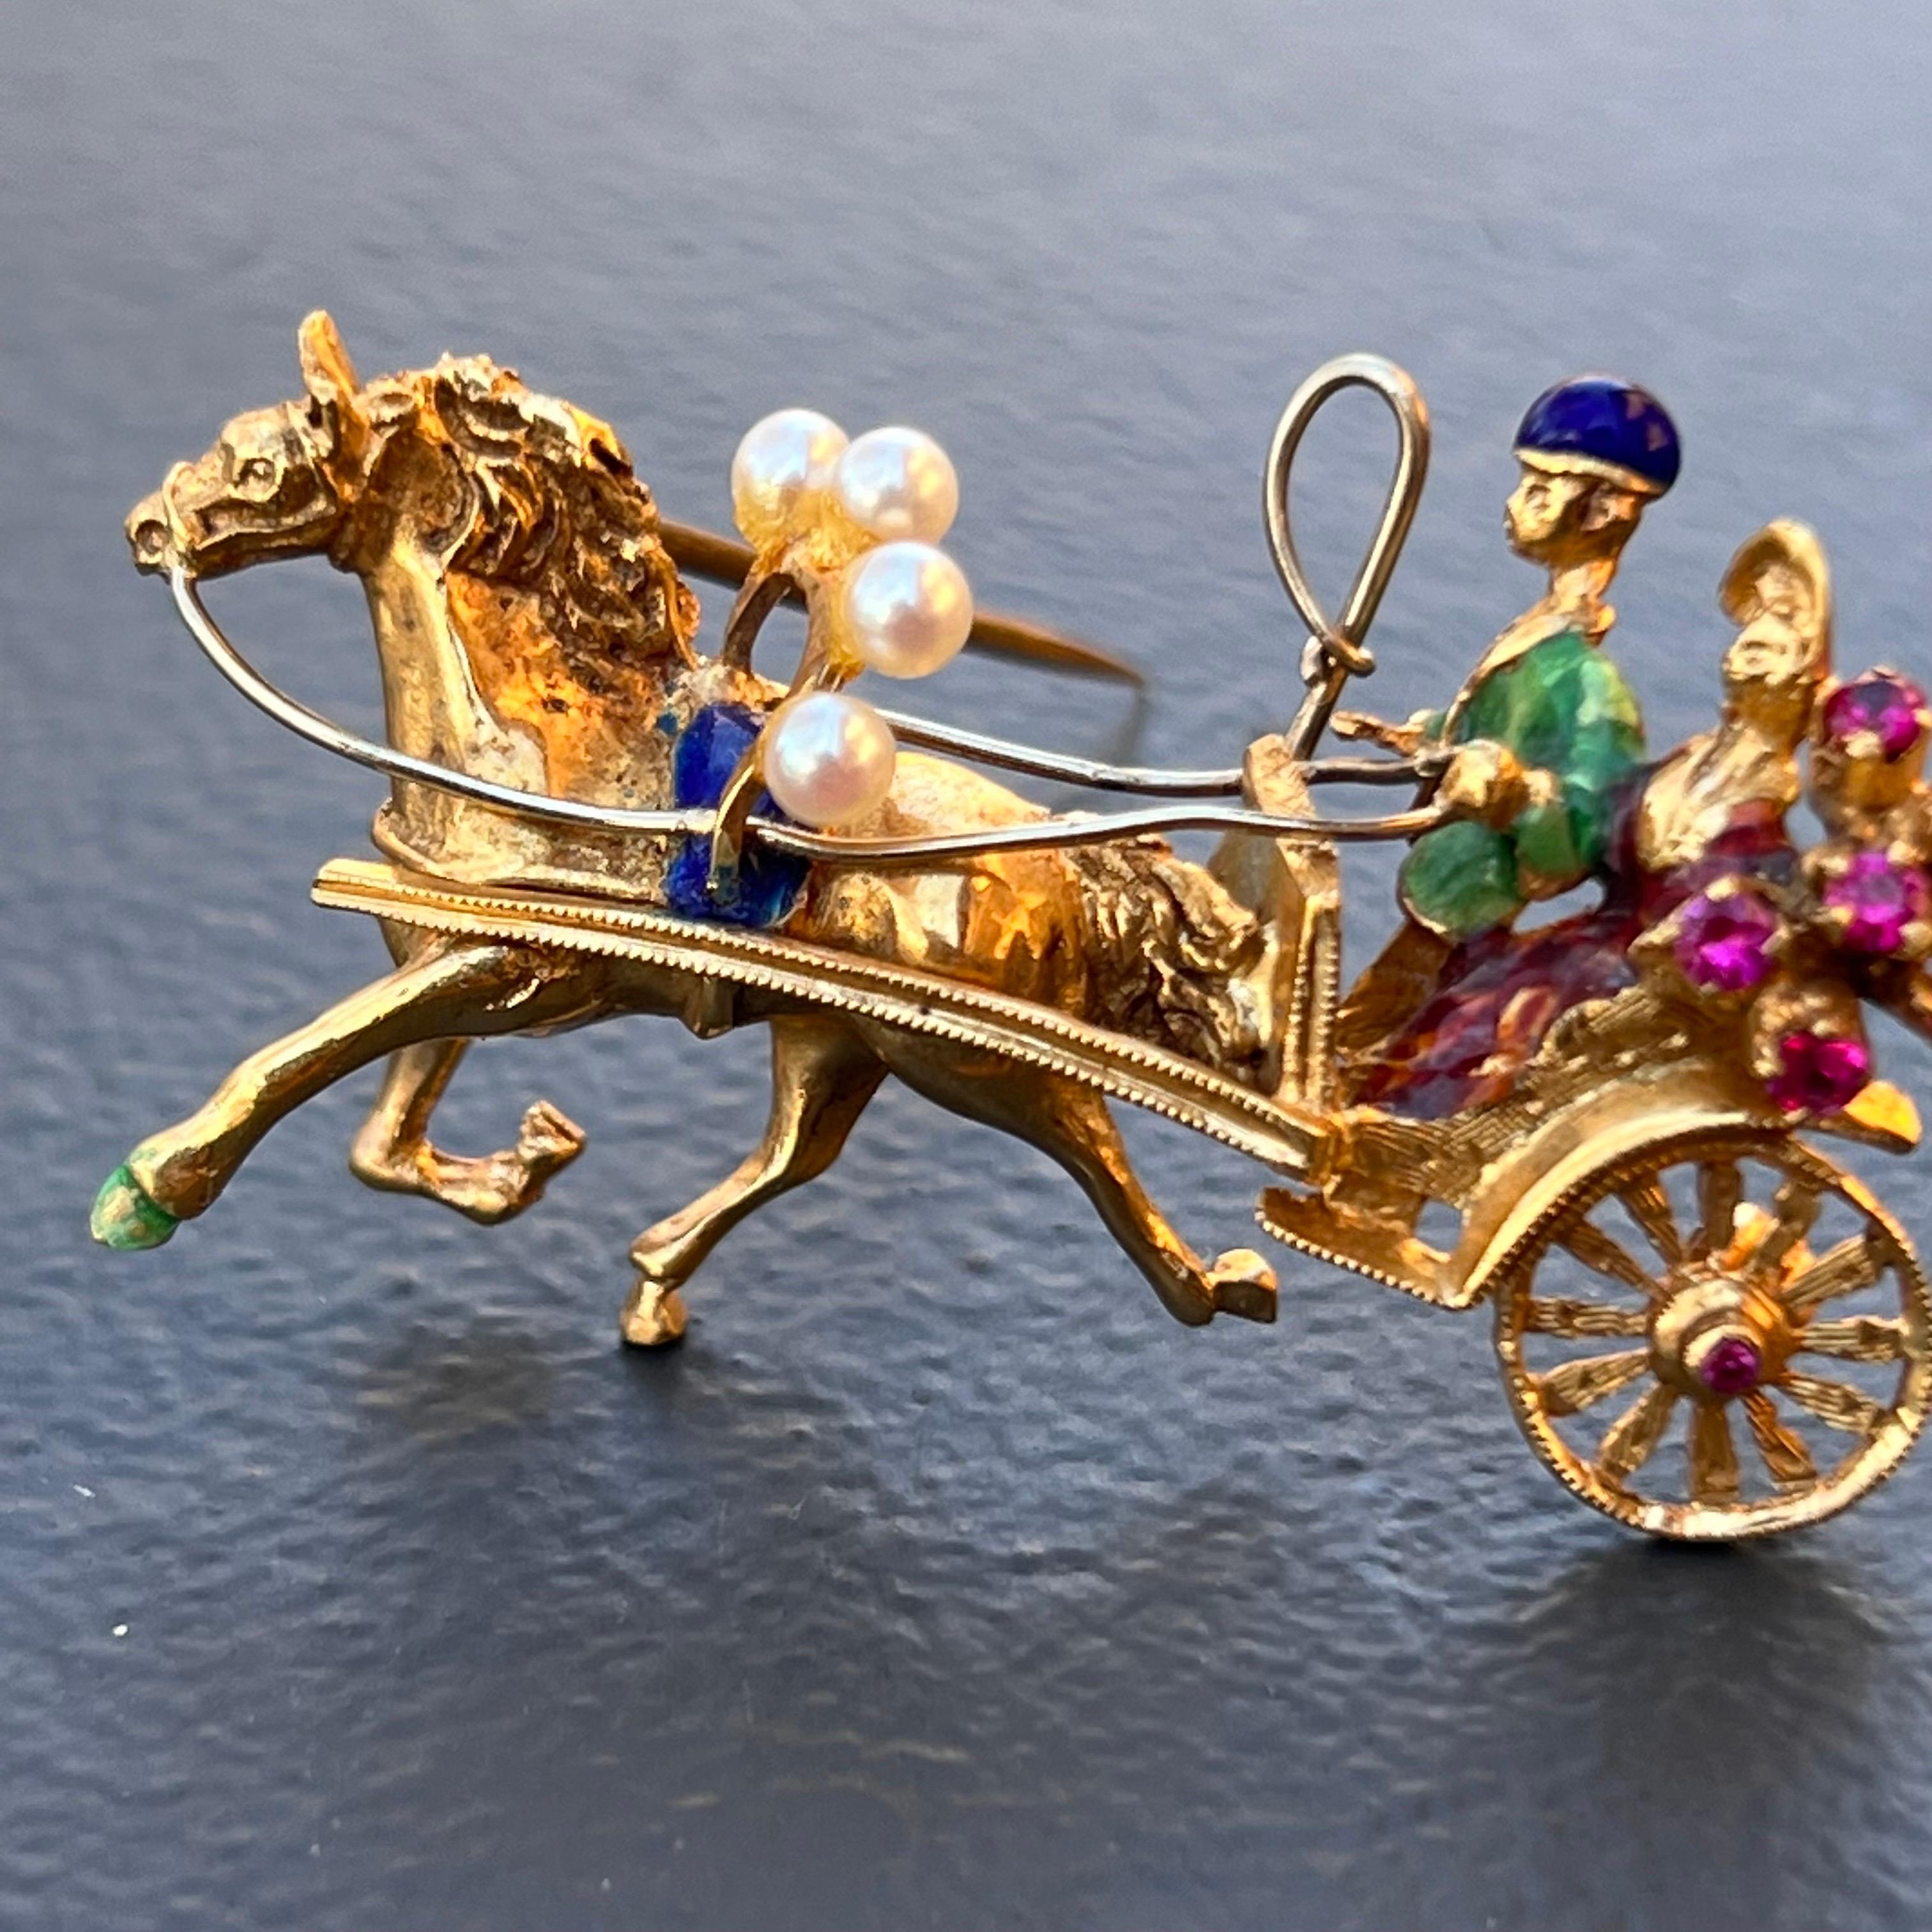 18kt Solid Gold Rubies Newlywed Couple Horse Carriage Brooch In Good Condition For Sale In Plainsboro, NJ